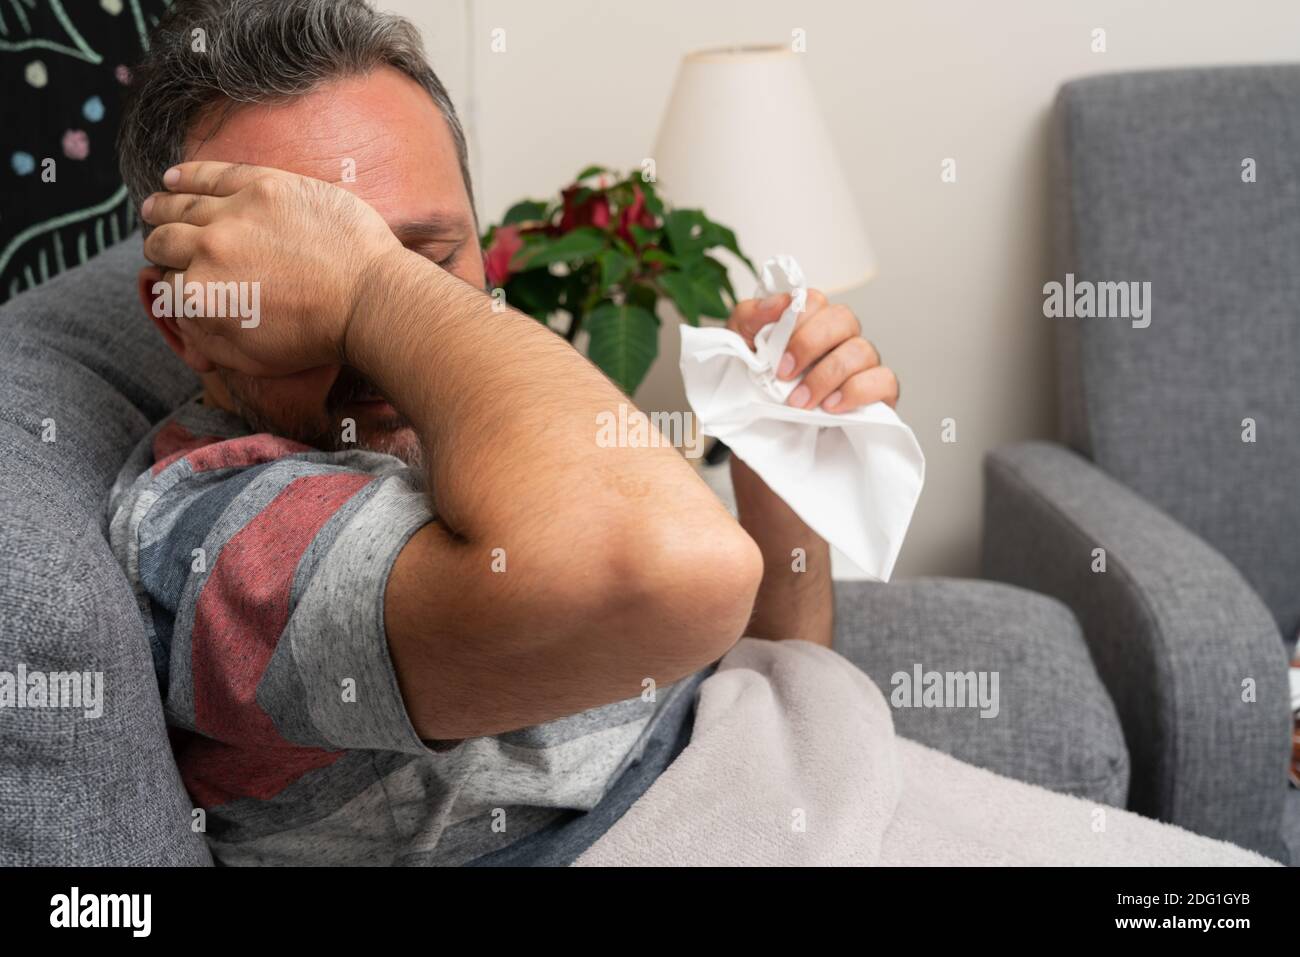 Sick man with sinusitis headache touching forehead holding napkin as cold flu virus infection illness say at home concept feeling unwell Stock Photo